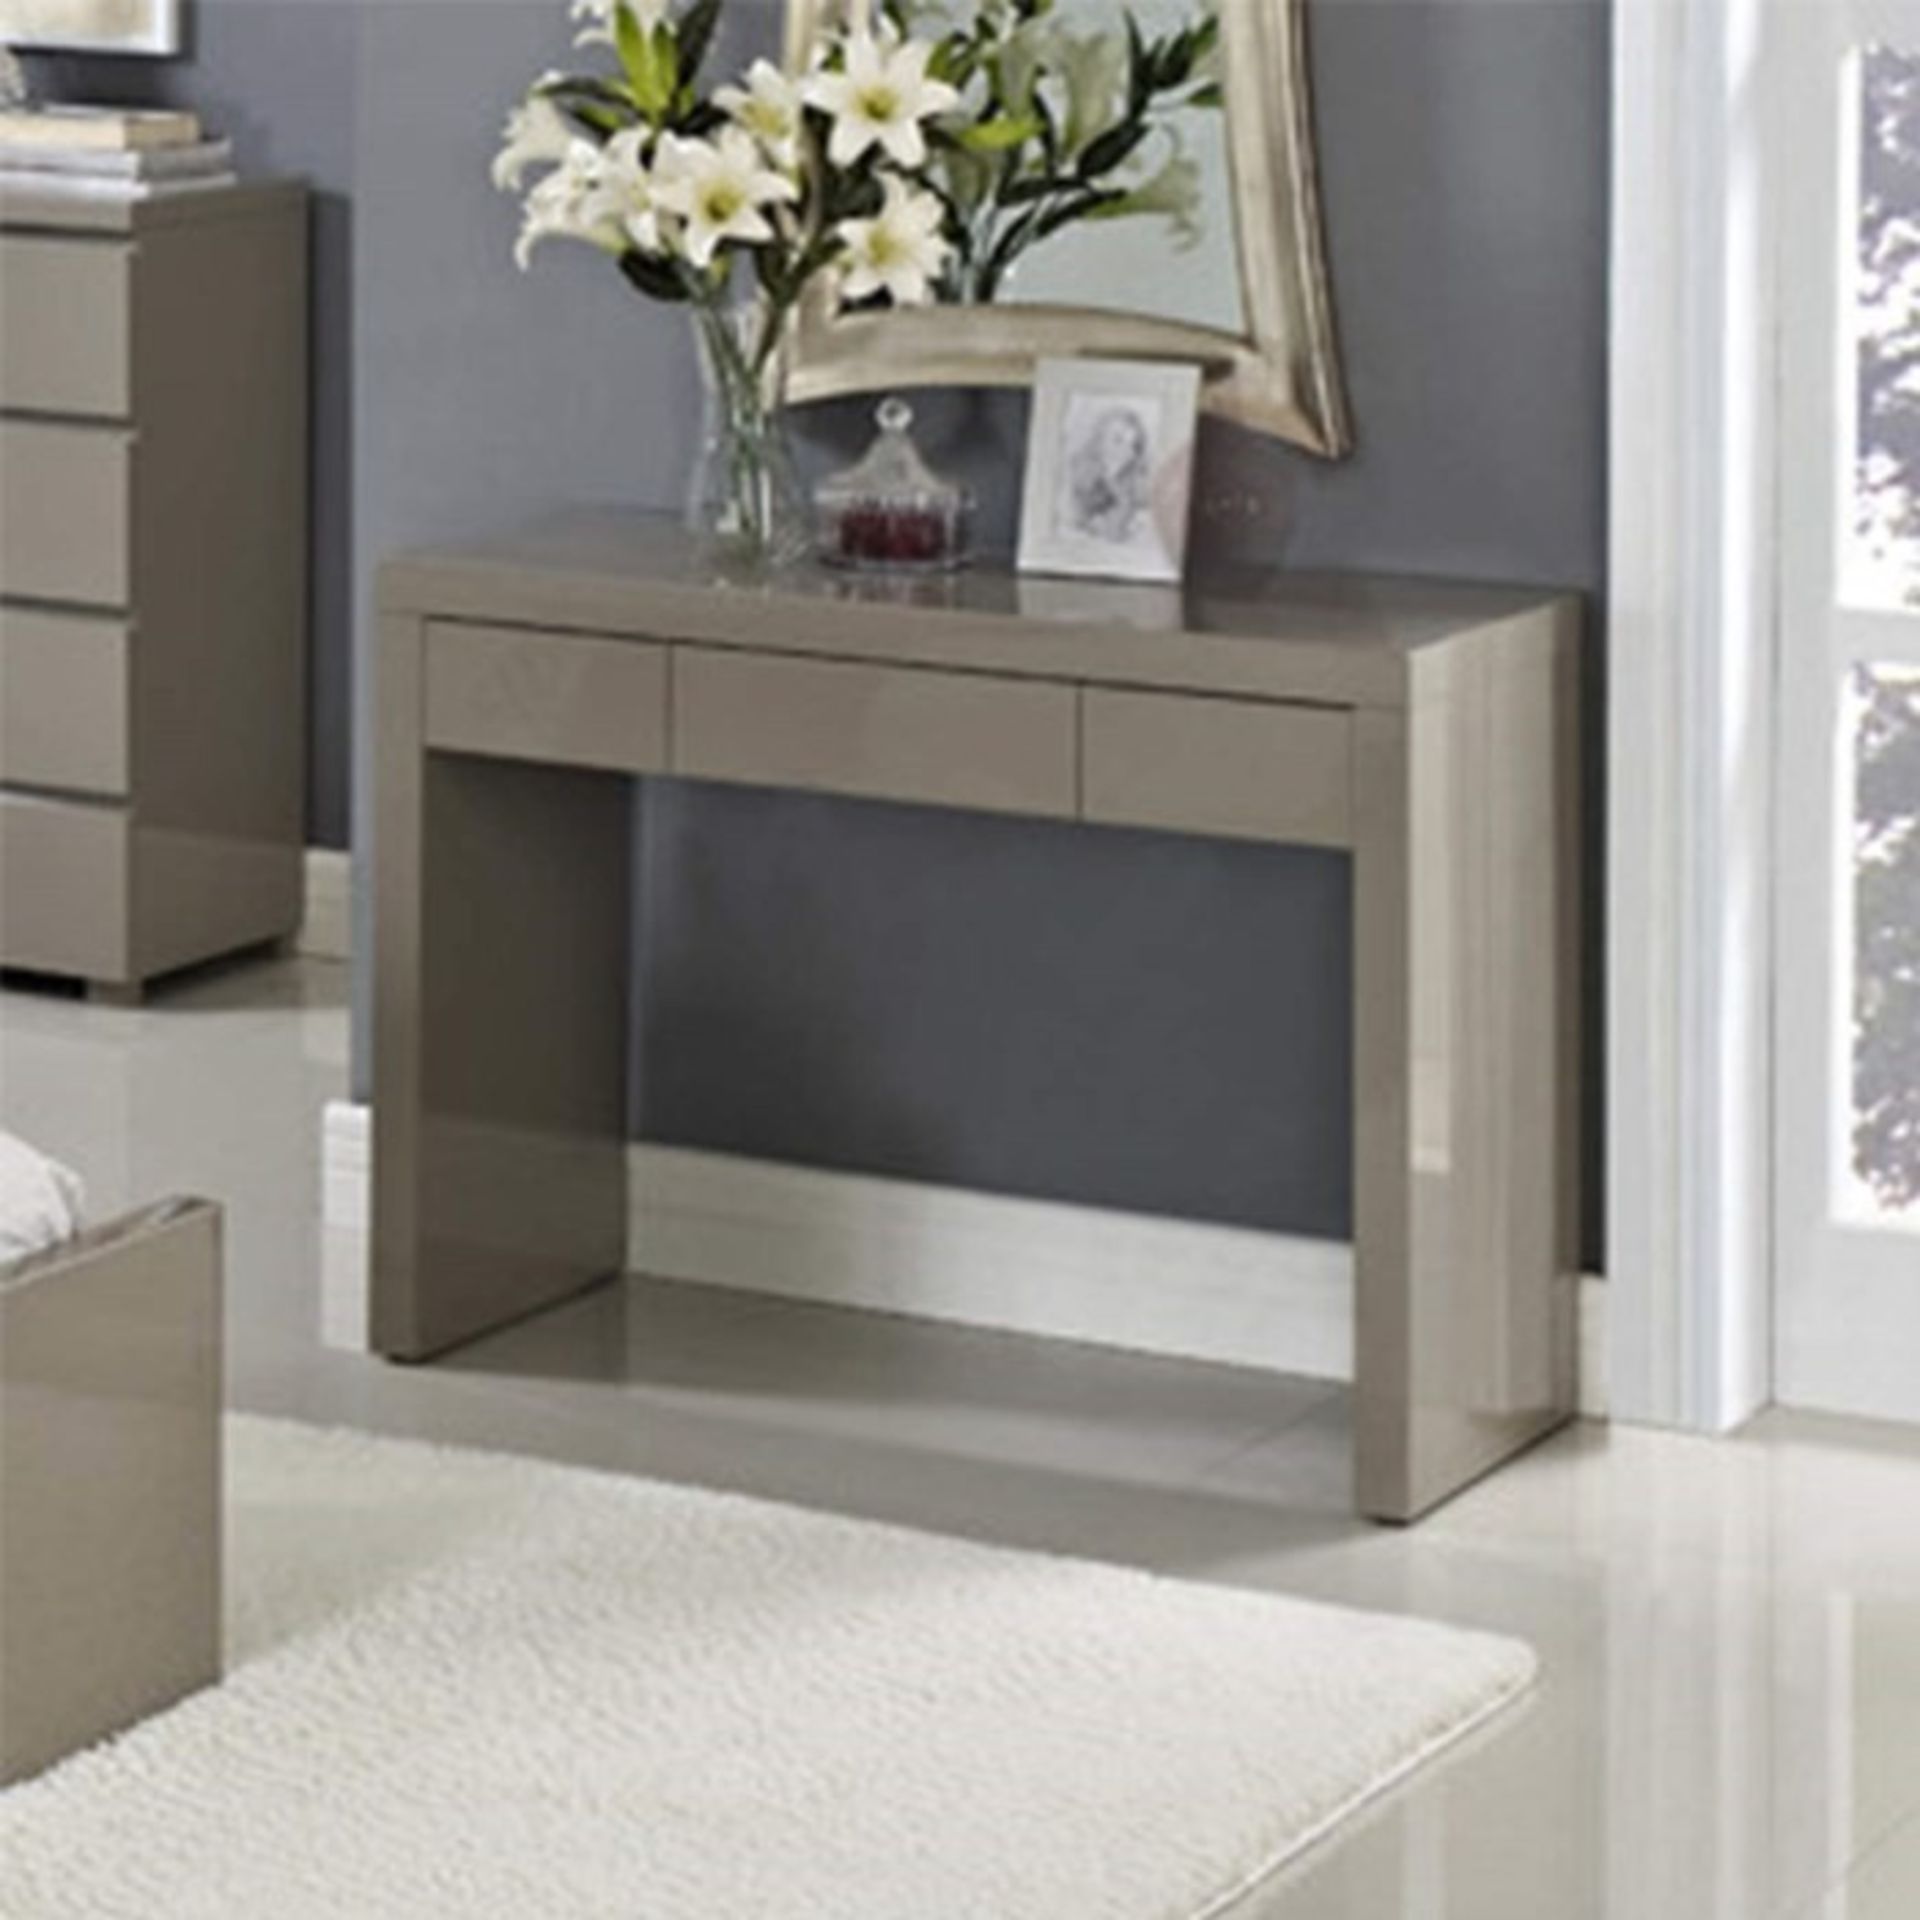 1 BOXED PURO DESK/DRESSING TABLE IN STONE